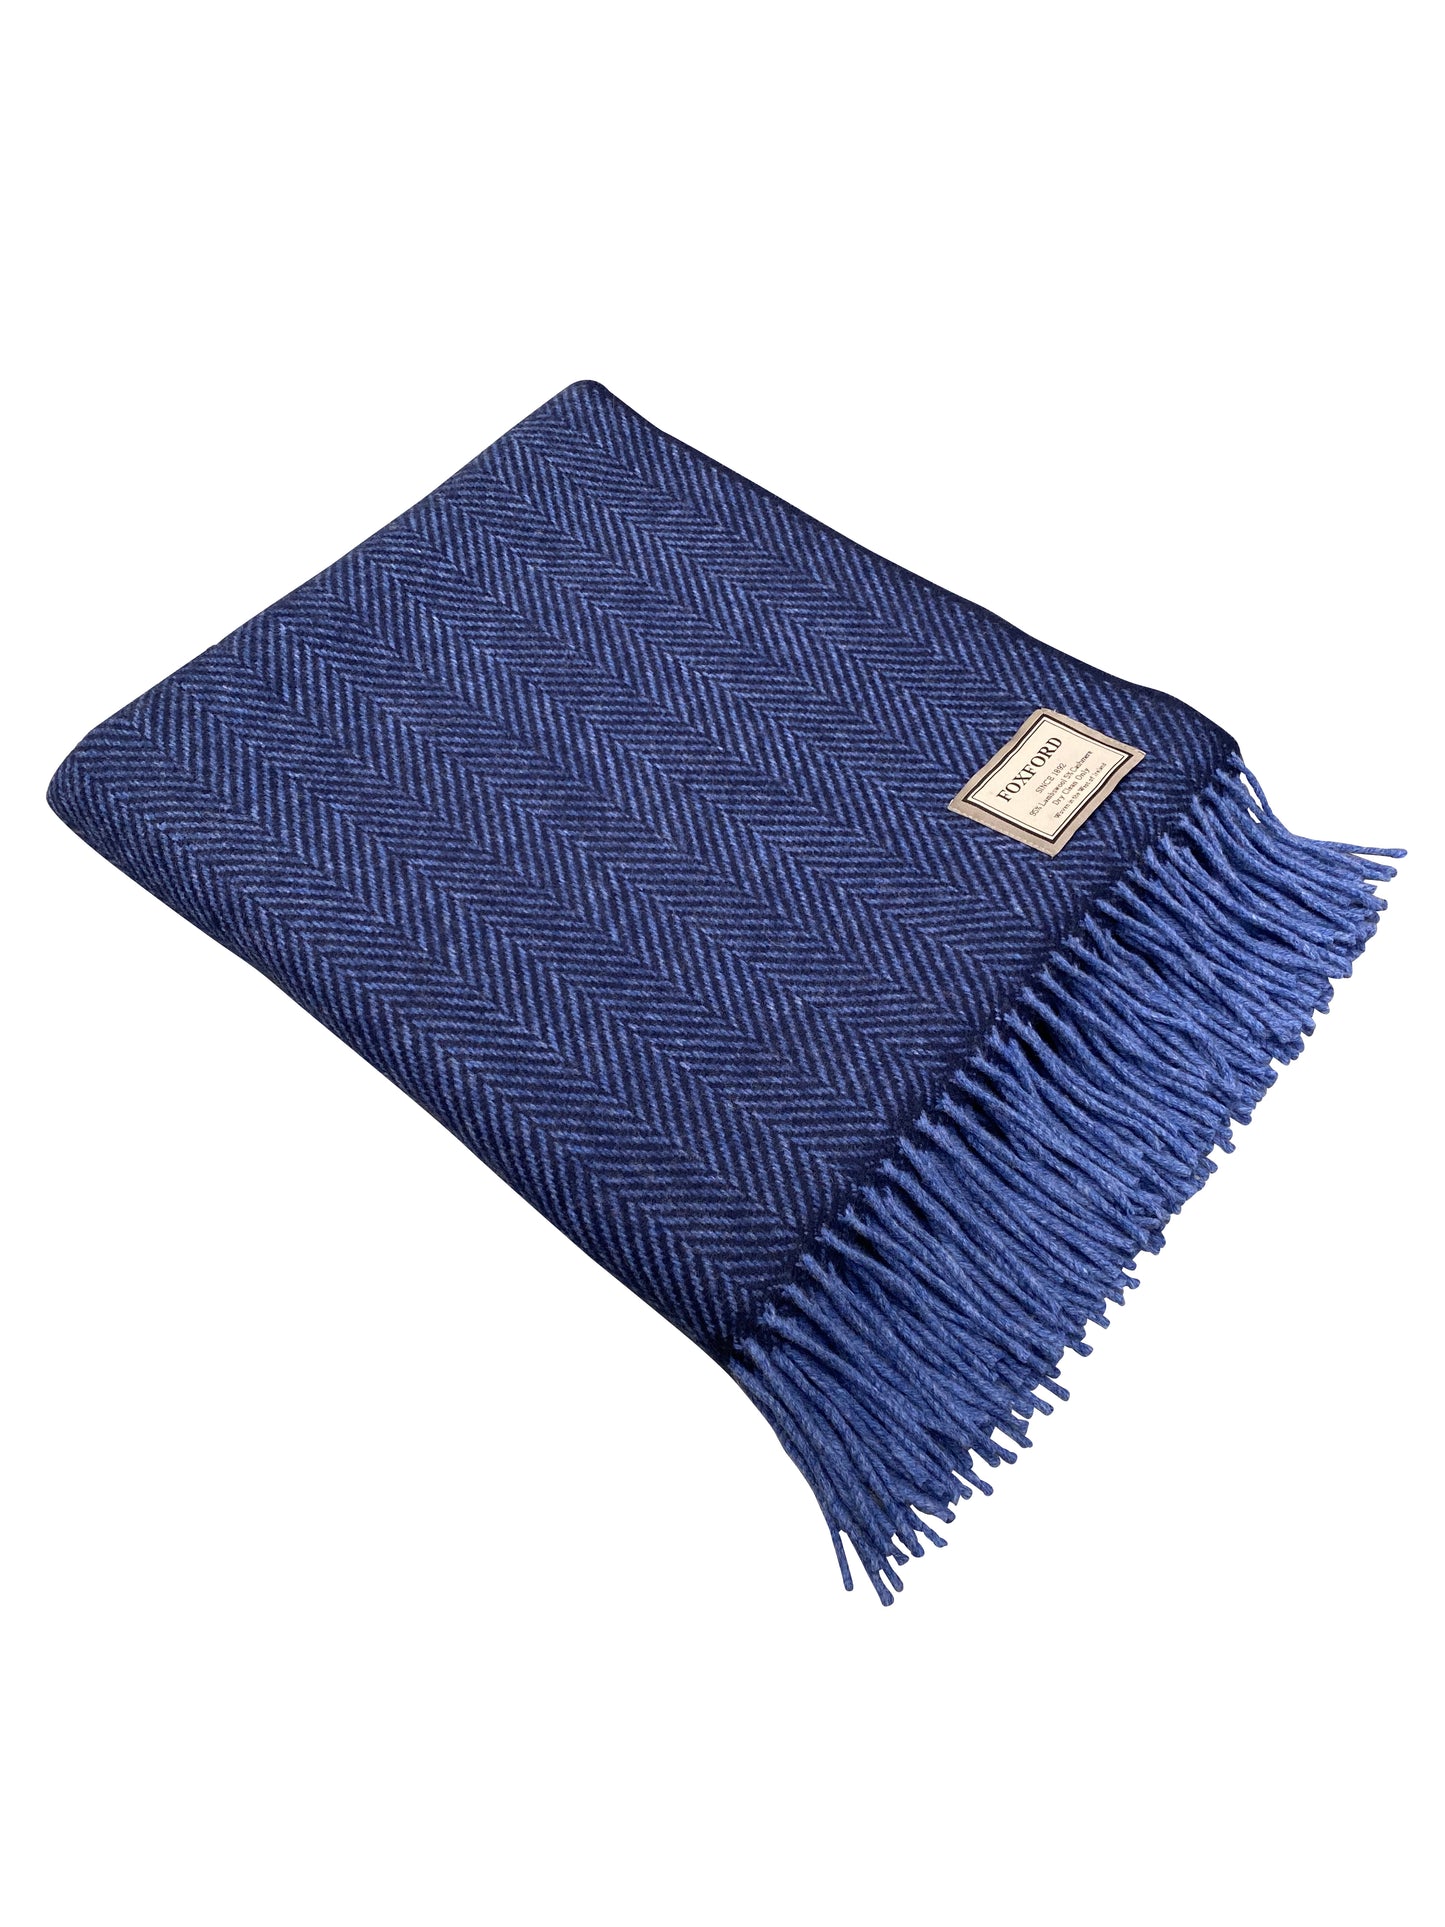 cashmere and lambswool cong throw in denim navy from foxford mill